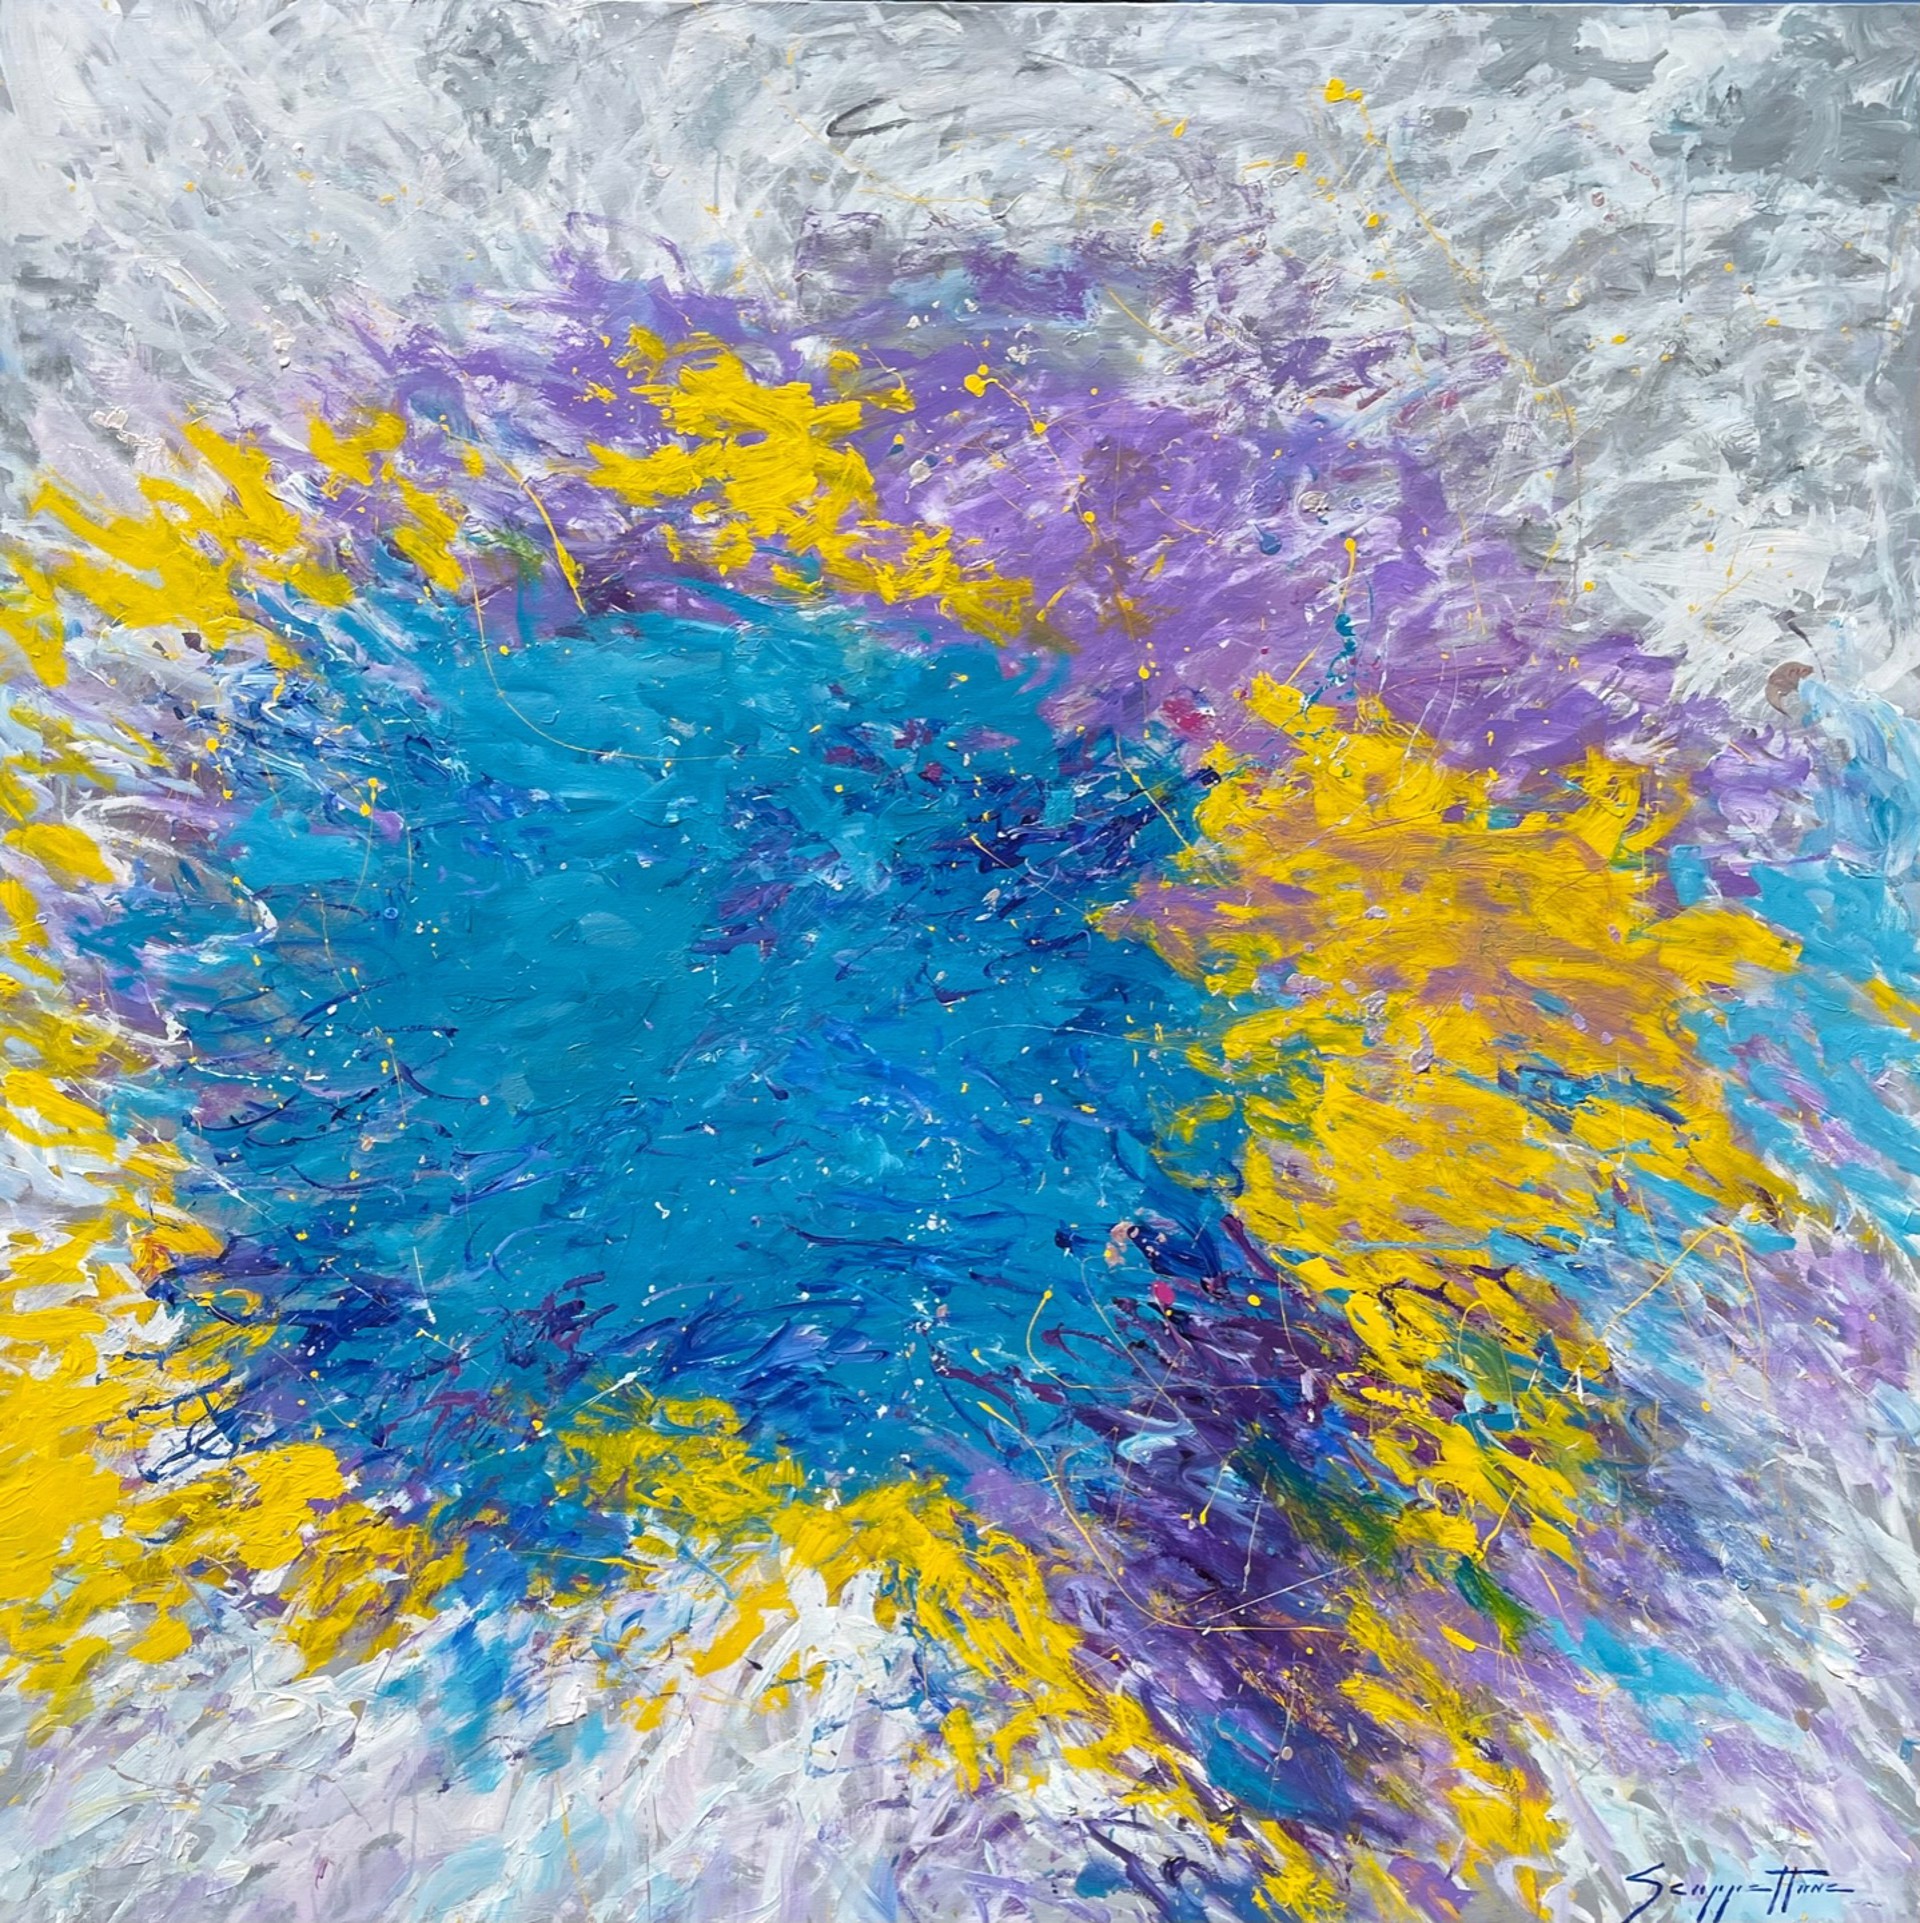 Big Splash (Euphoria) by James Scoppettone (Abstracts)